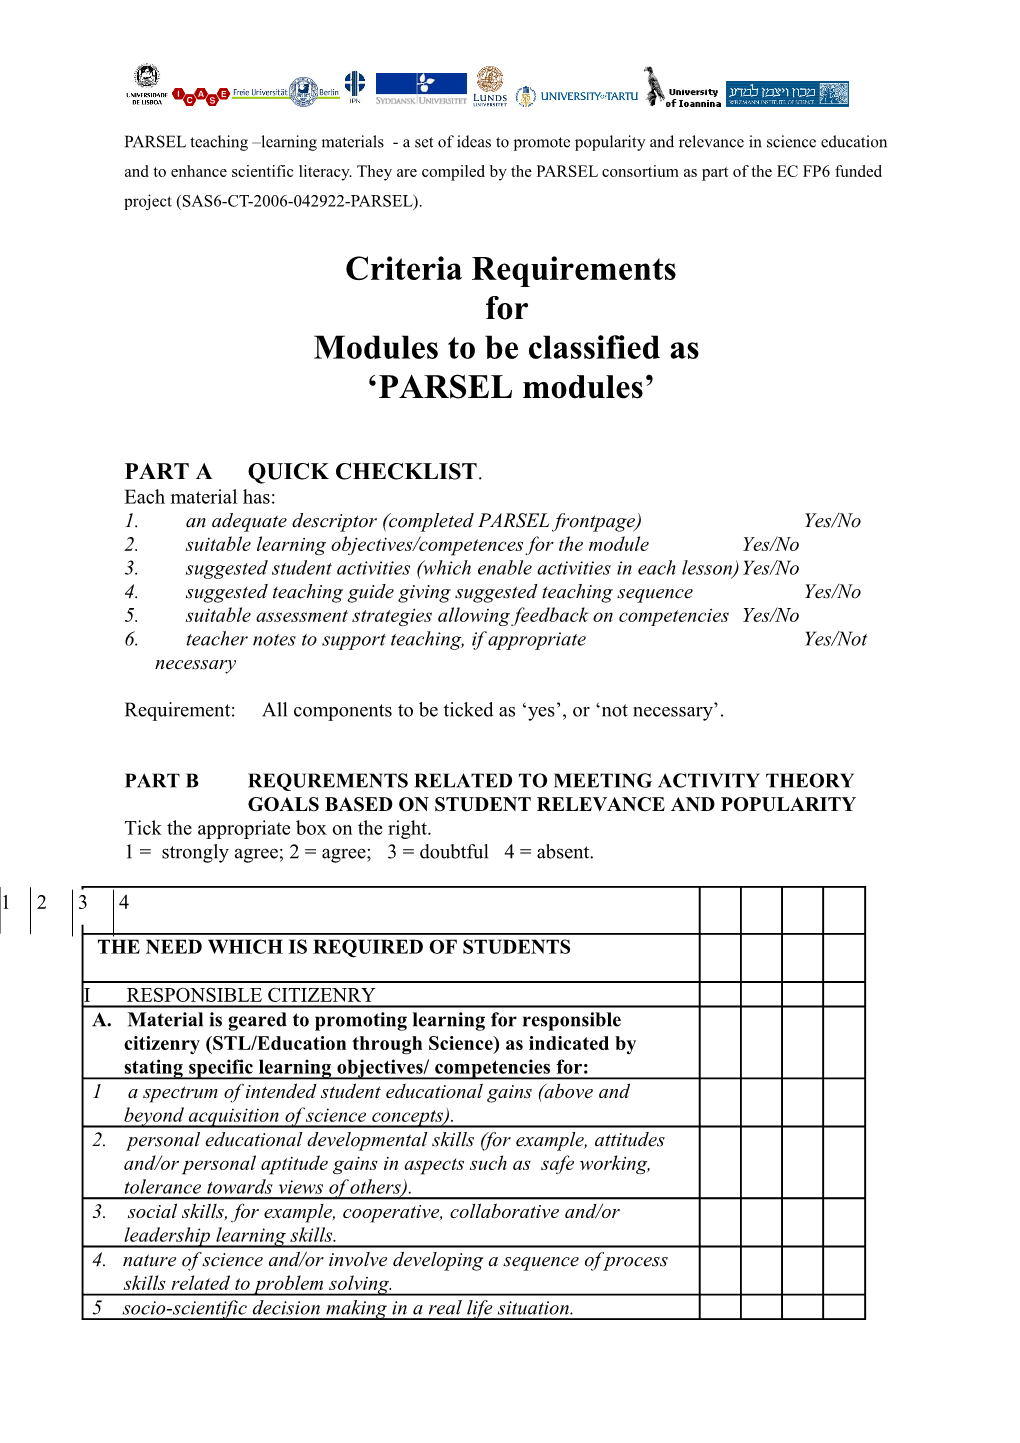 PARSEL Criteria Requirements for Inclusion As a PARSEL Module (PARSEL = Promoting Popularity